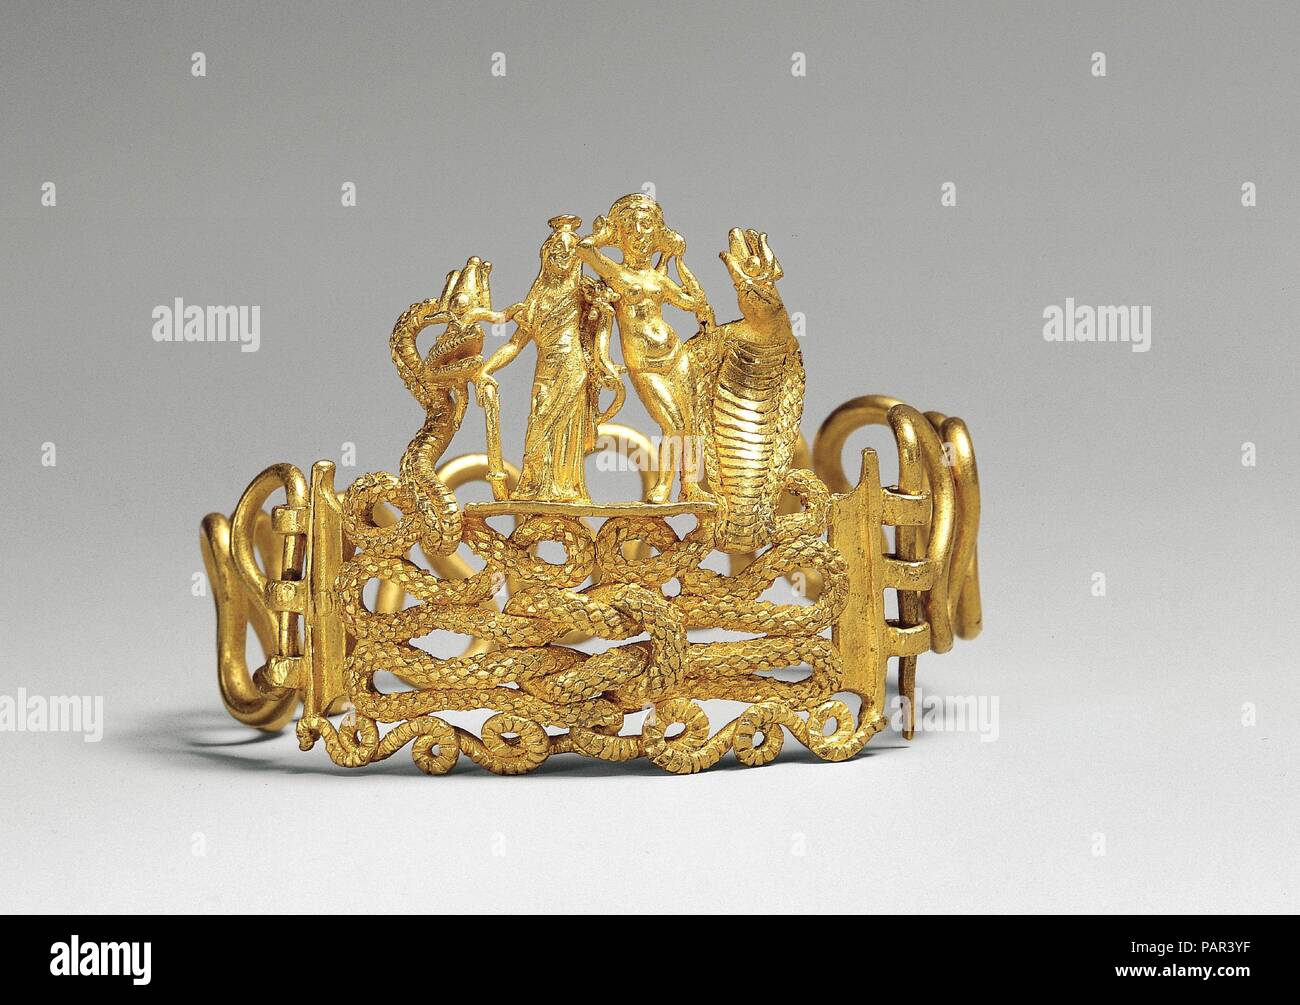 Bracelet with Agathodaimon, Isis-Tyche, Aphrodite, and Terenouthis. Dimensions: 1 9/16 x 2 3/16 in. (4 x 5.5 cm). Date: 1st century B.C.-A.D. 1st century.  Powerful talismans of fertility and good destiny are woven into this rich golden composition. The bodies of two snakes intertwine to form a Herakles knot, the centerpiece of this bracelet. The snake on the left represents Agathodaimon, and the cobra on the right Terenouthis, two agrarian/fertility deities associated with Serapis and Isis, respectively. On the platform between them stand two goddesses, Isis-Tyche (or Isis-Fortuna), a deity c Stock Photo